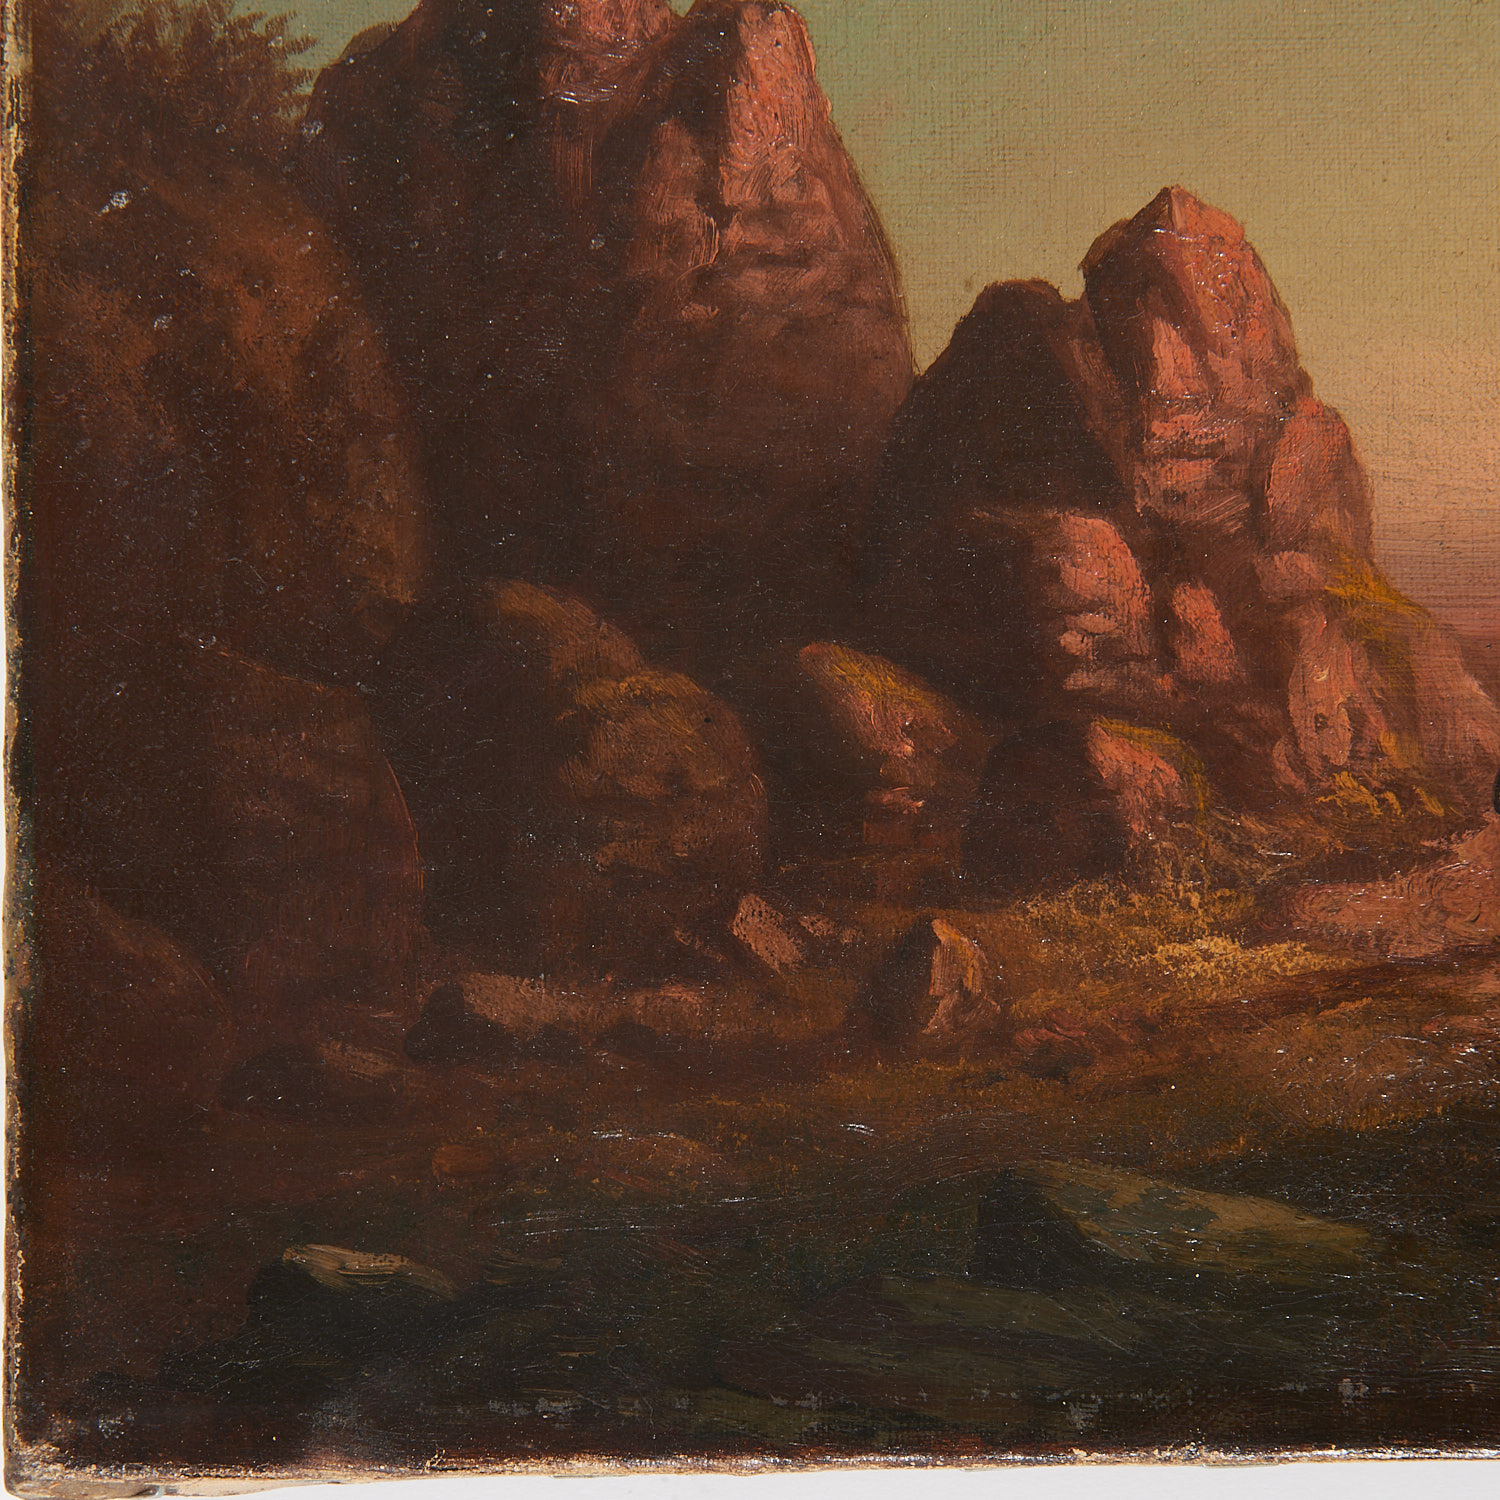 Harold Rudolph, painting, 1874 - Image 3 of 7